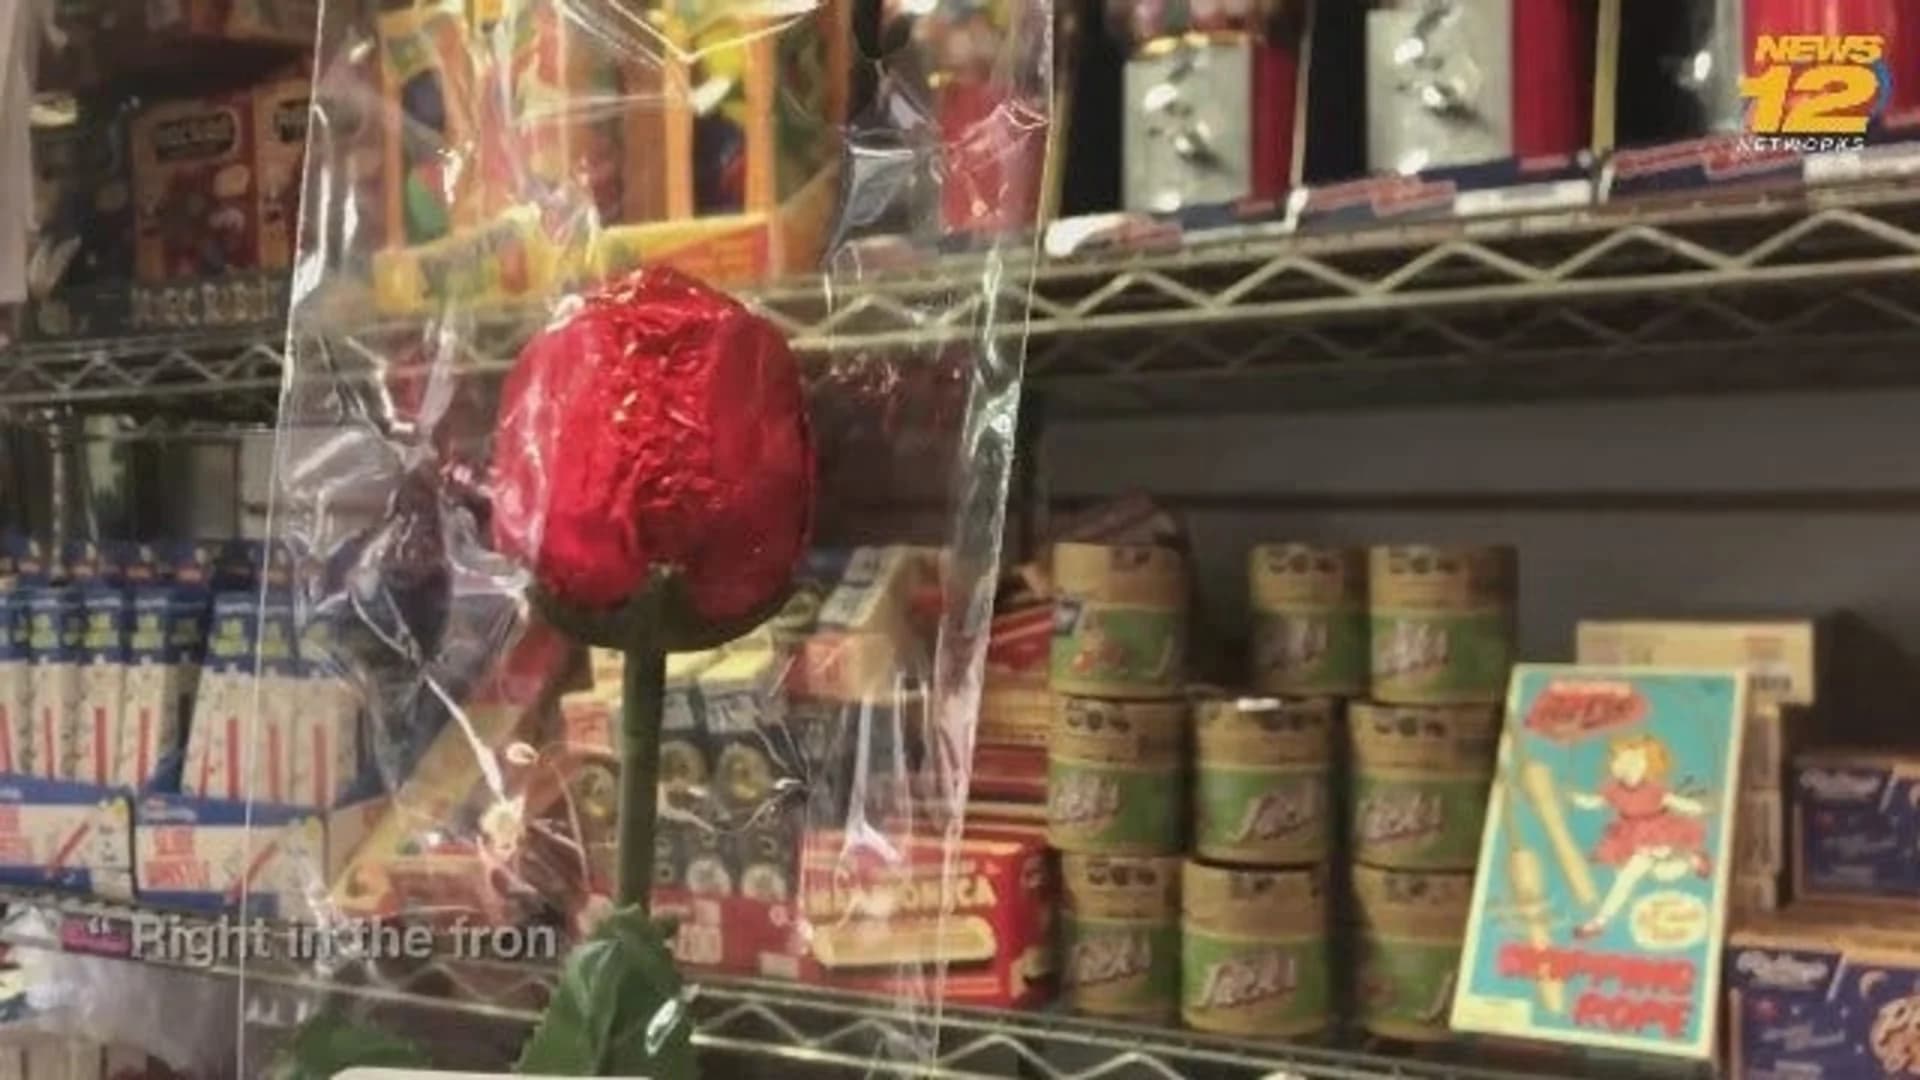 Candy store stands the test of time, serving multiple generations of customers